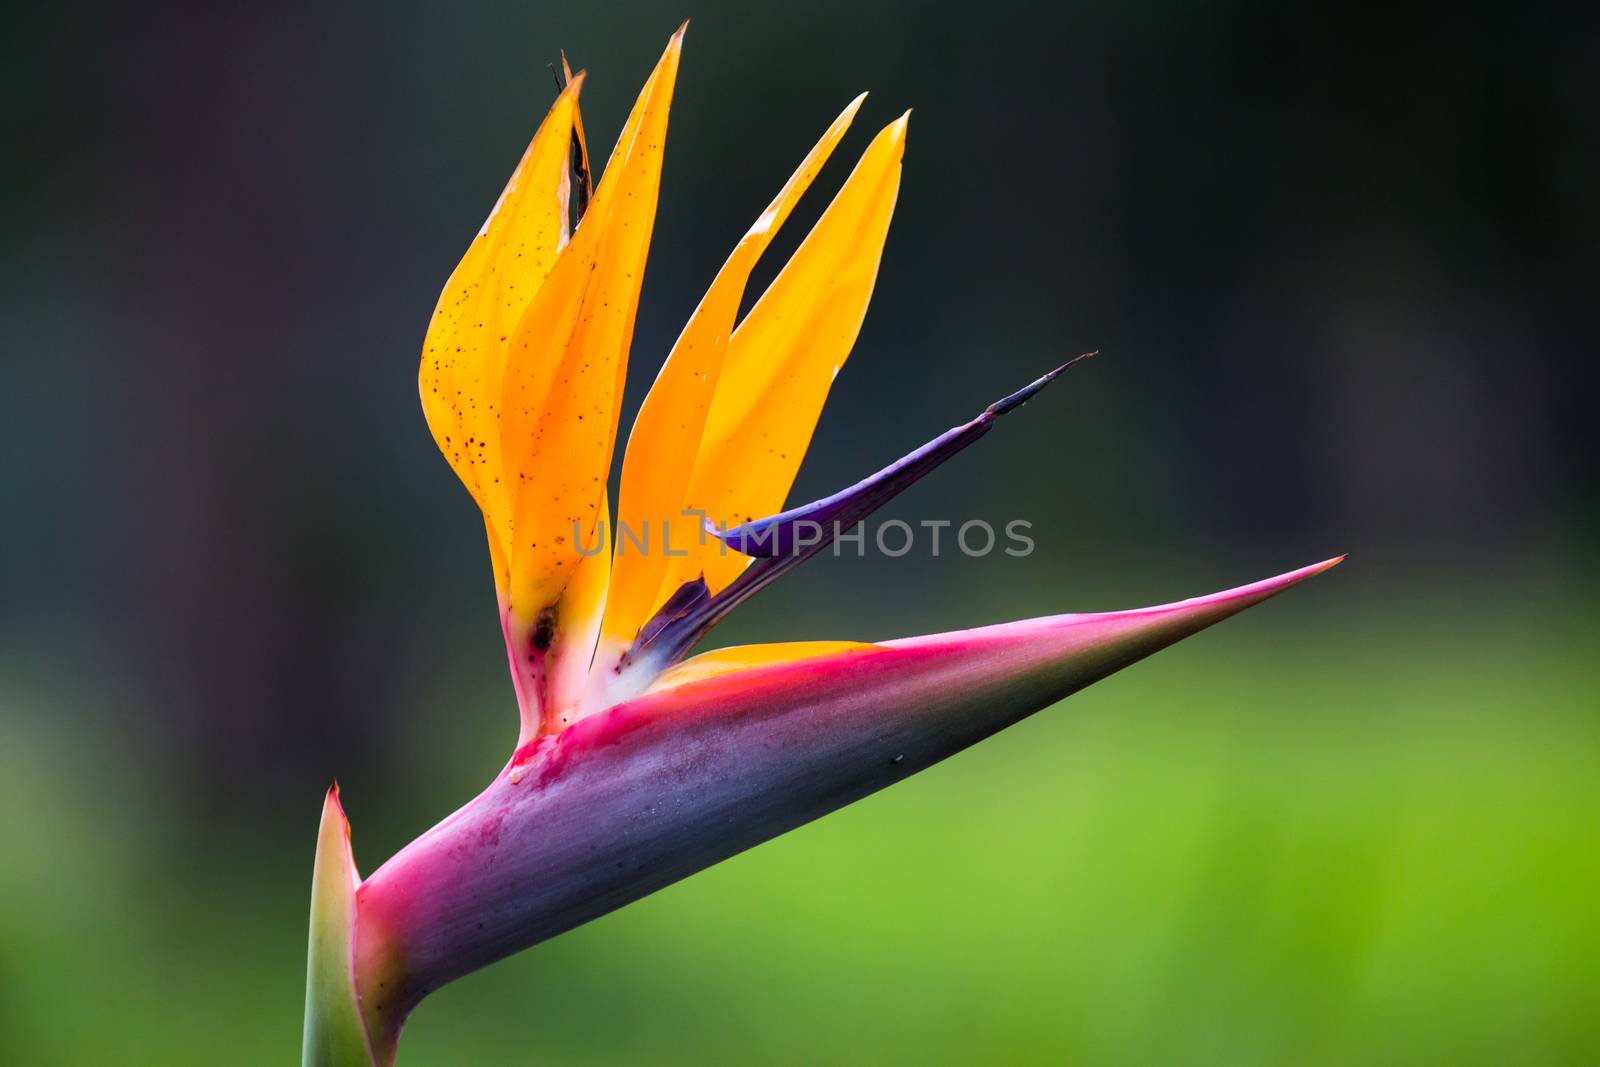 Beautiful Strelitzia flower with yellow and mauve colors